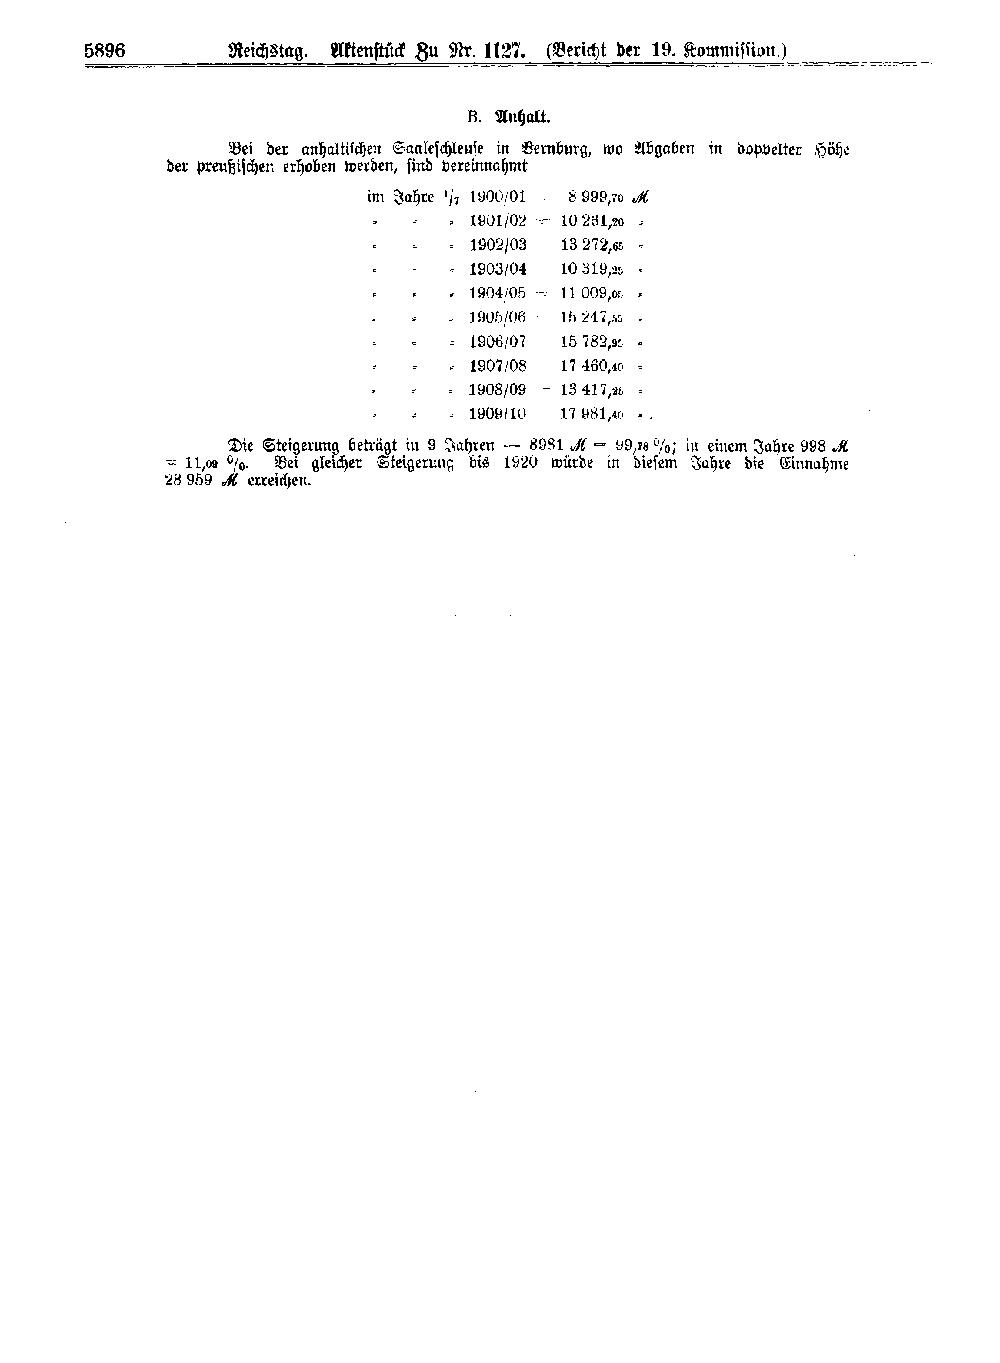 Scan of page 5896